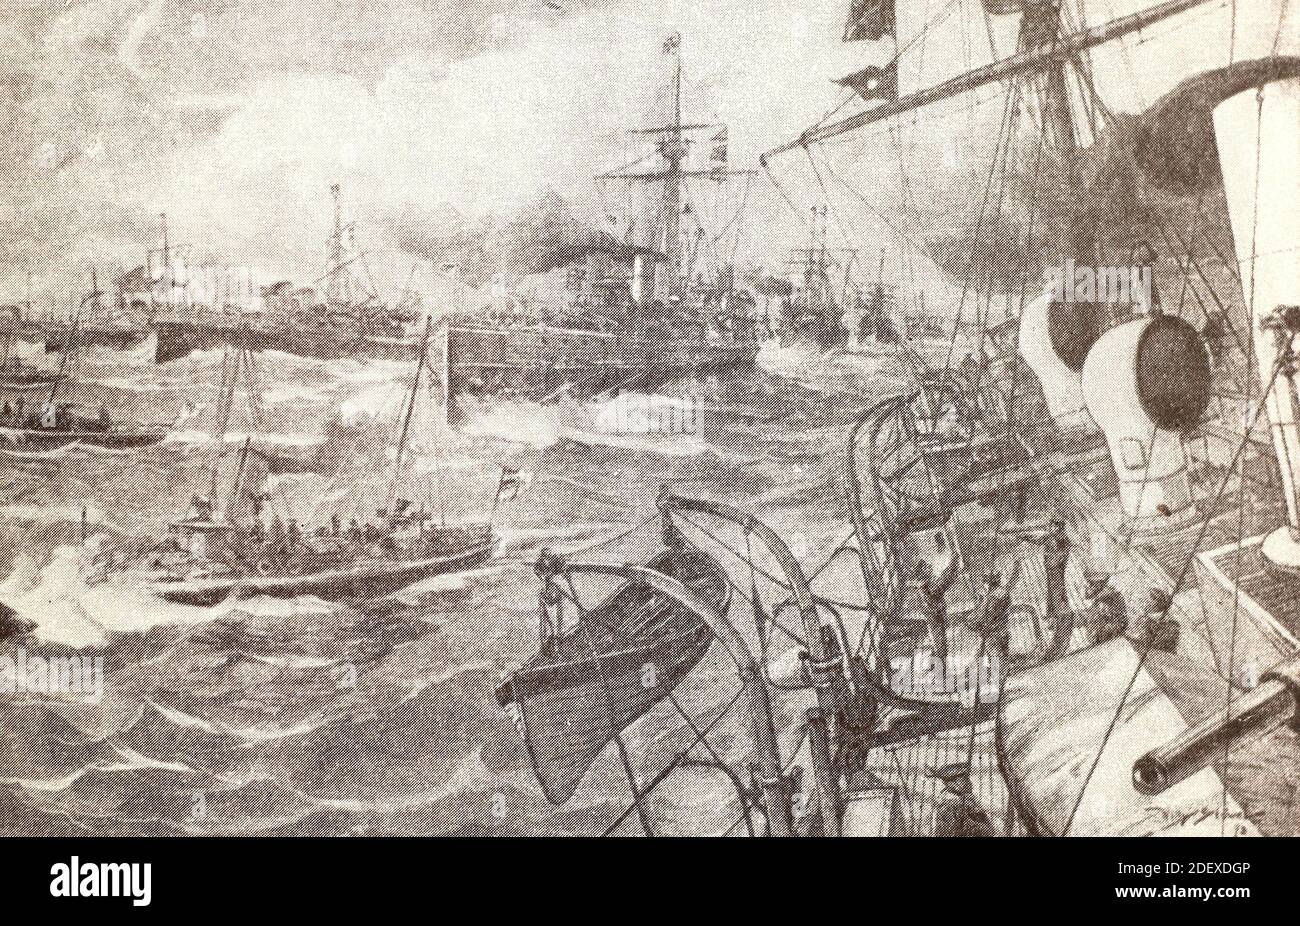 Maneuvers of the German navy in the Baltic Sea. Engraving of 1893. Stock Photo